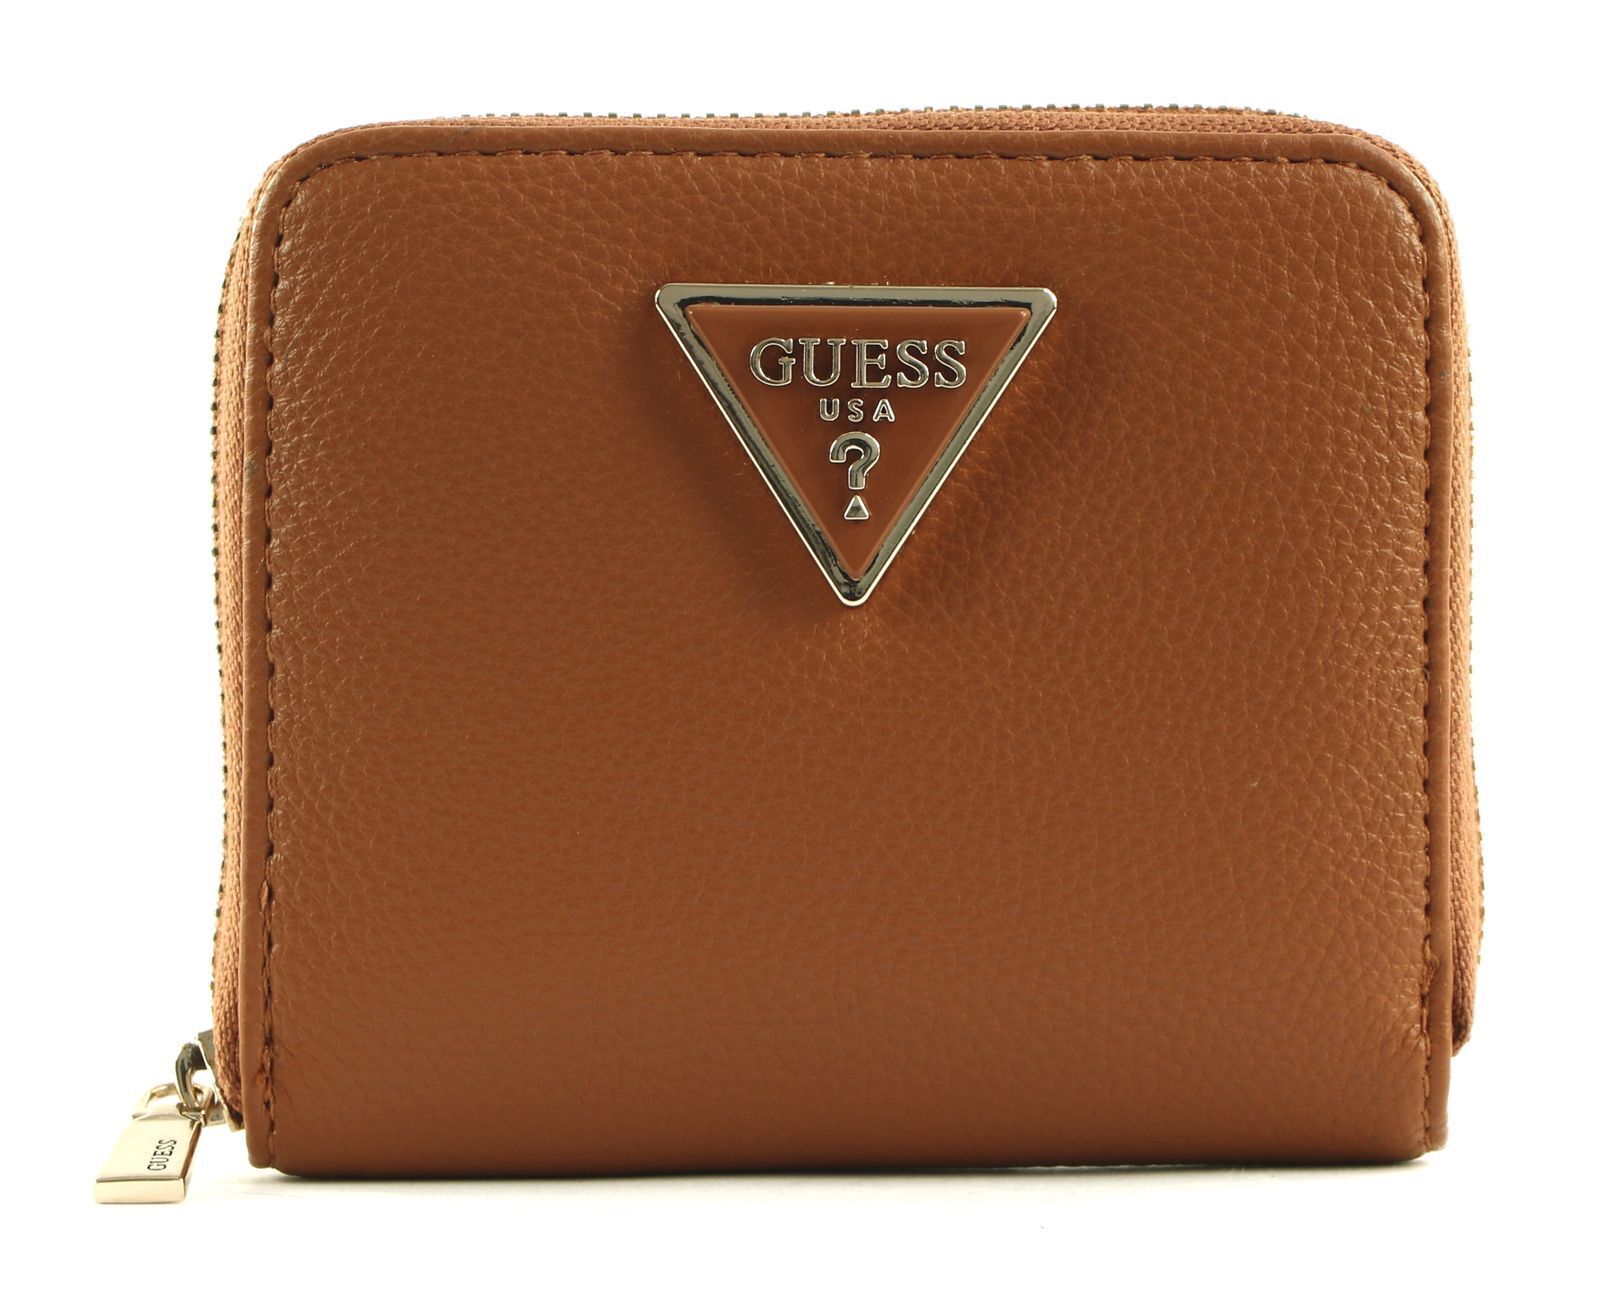 Guess MERIDIAN SLG SMALL ZIP AROUND